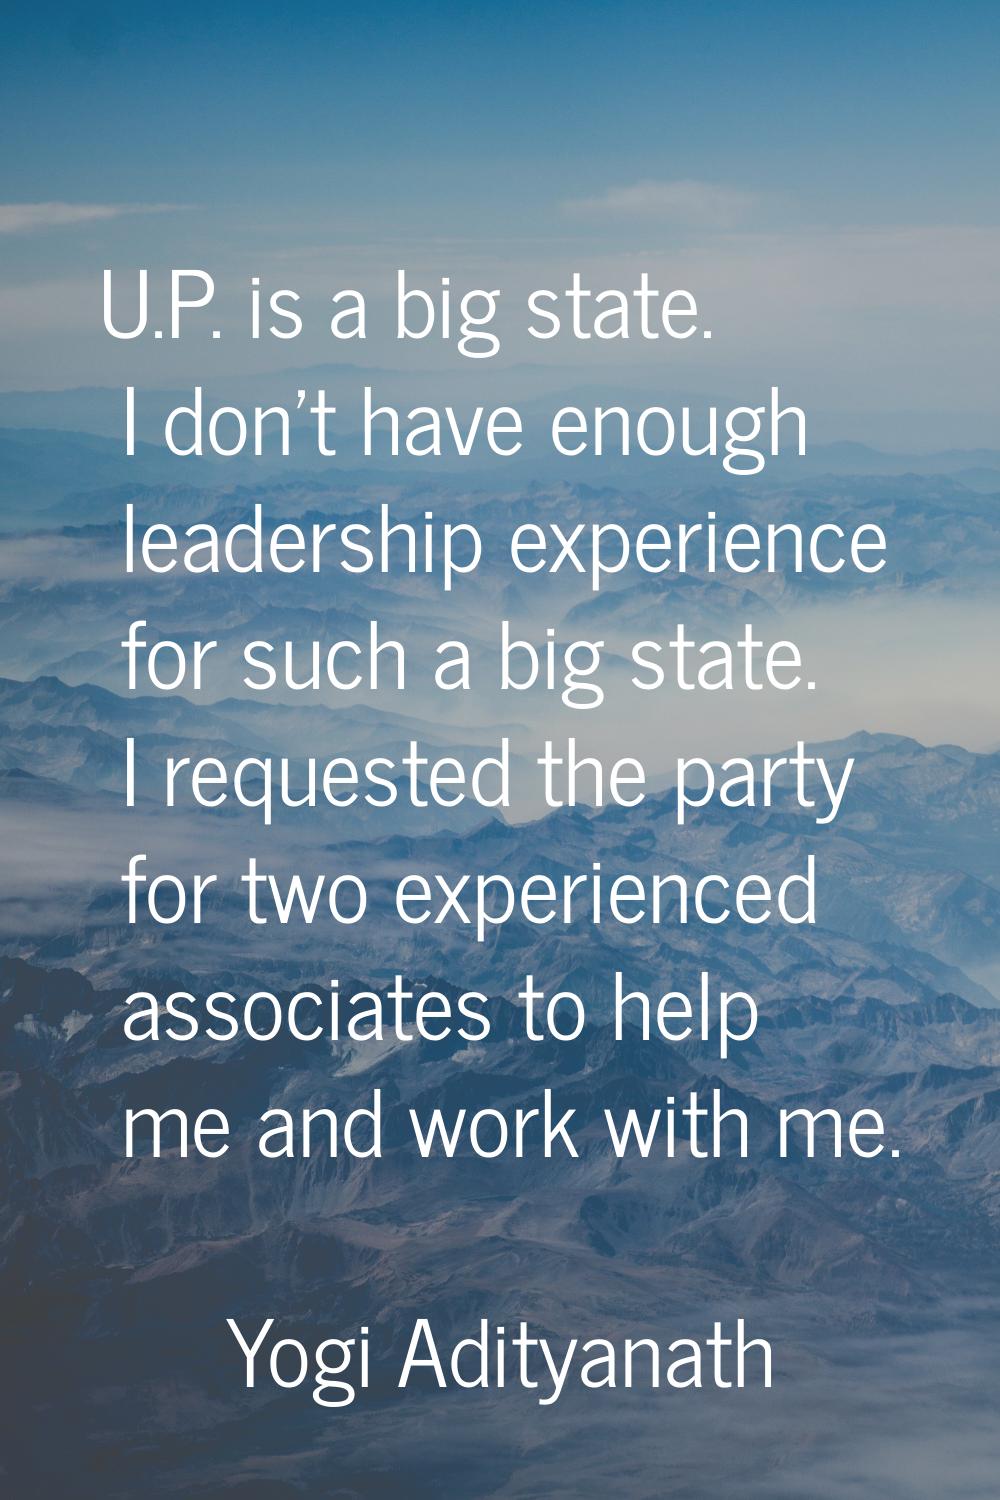 U.P. is a big state. I don't have enough leadership experience for such a big state. I requested th